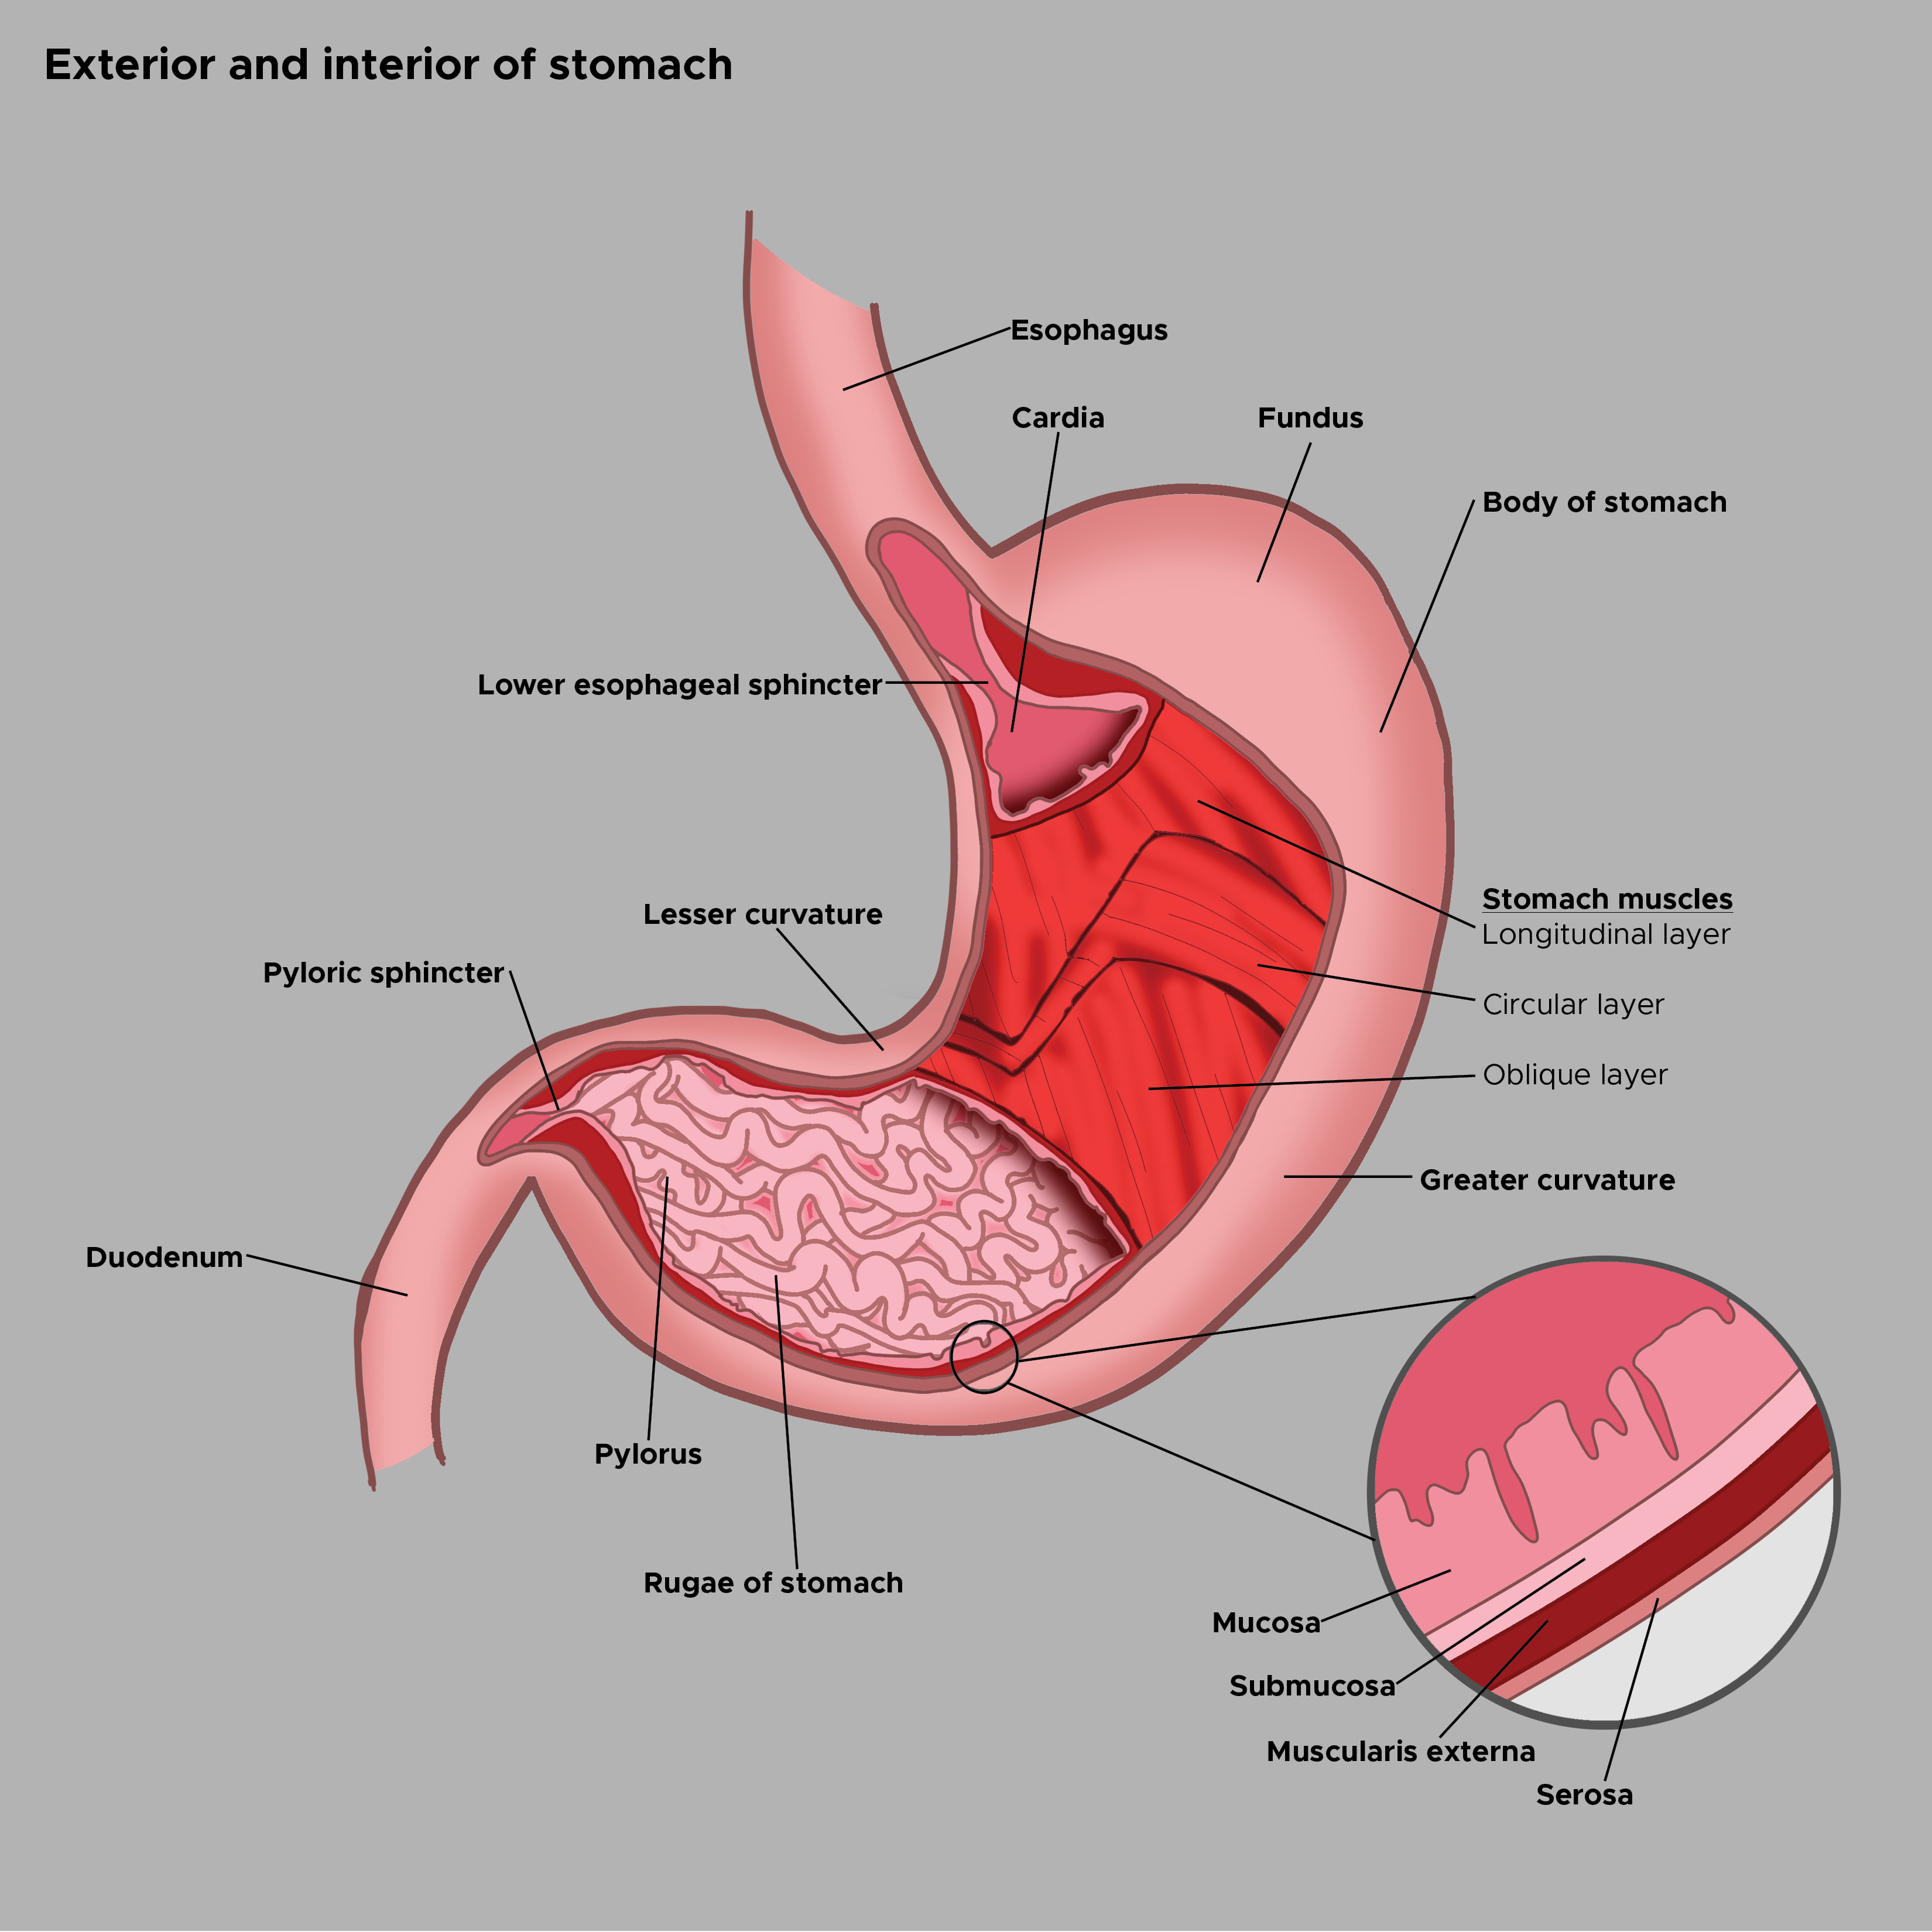 Illustration of the exterior and interior of the stomach. Esophagus, fundus, body of stomach, greater and lesser curvature. Duodenum, pyloric sphincter, lower esophageal sphincter. Stomach muscles. Rugae of stomach.